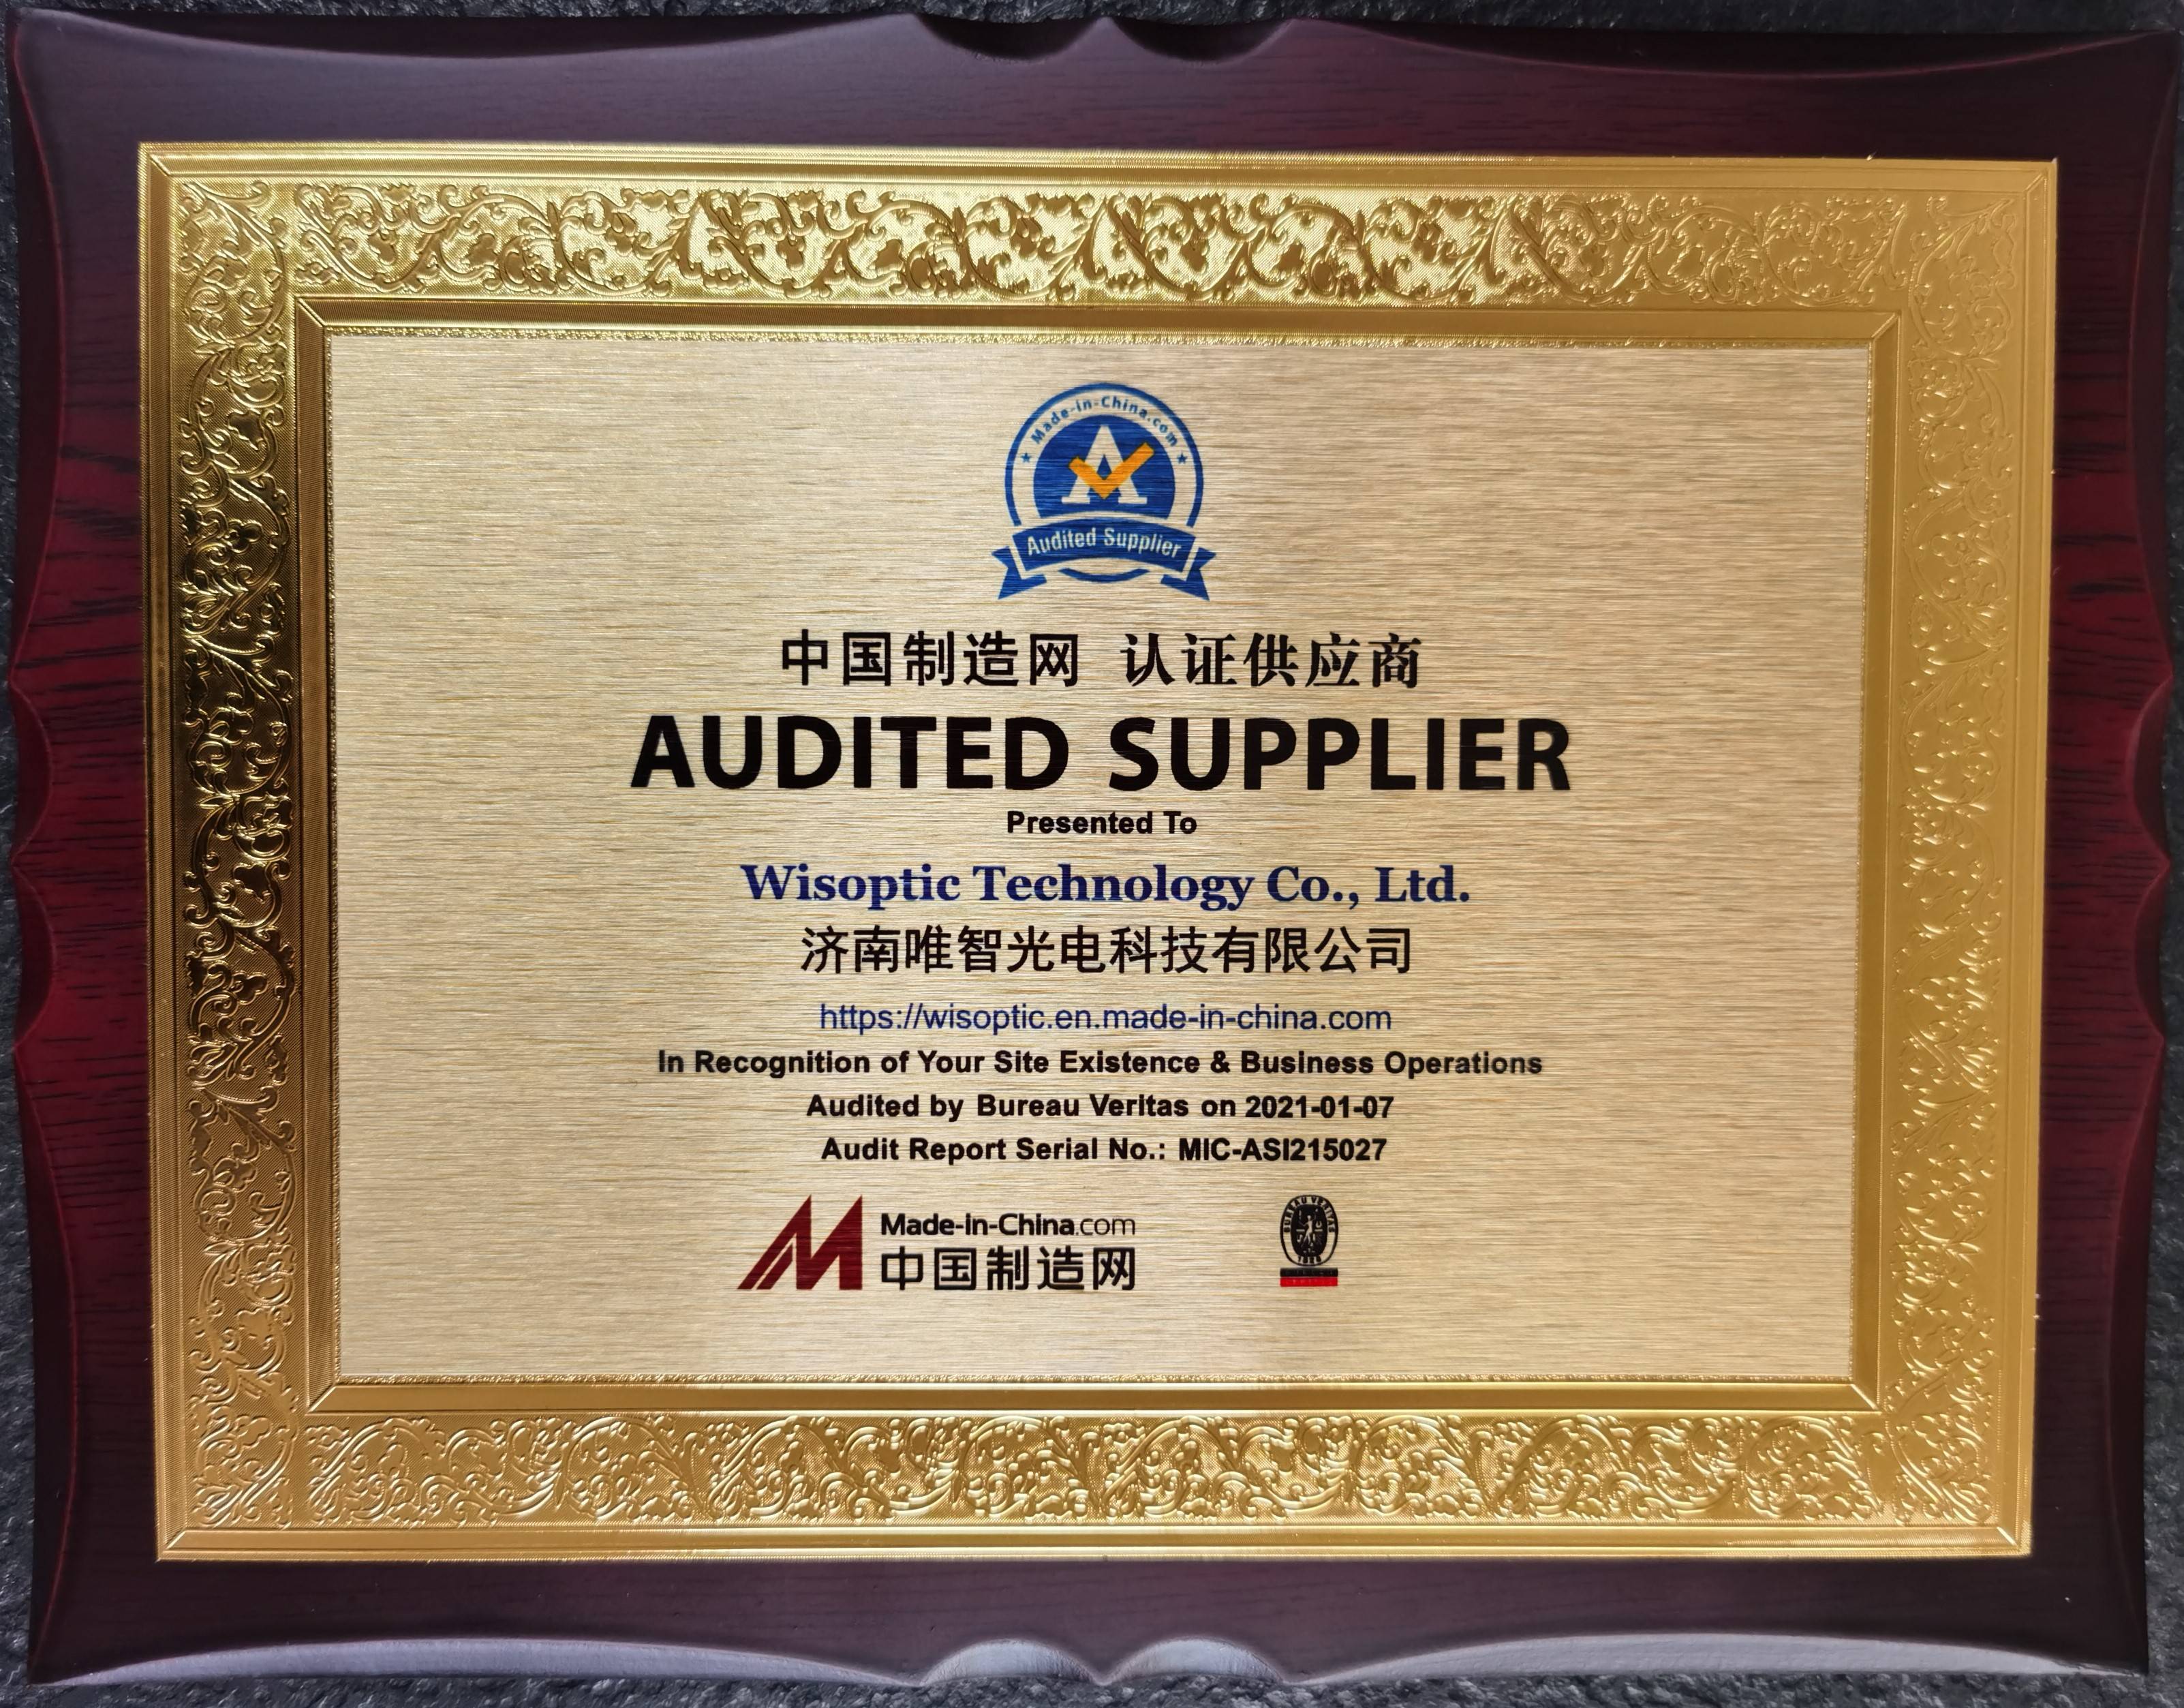 WISOPTIC has been recognized as qualified supplier of Made-in-China.com